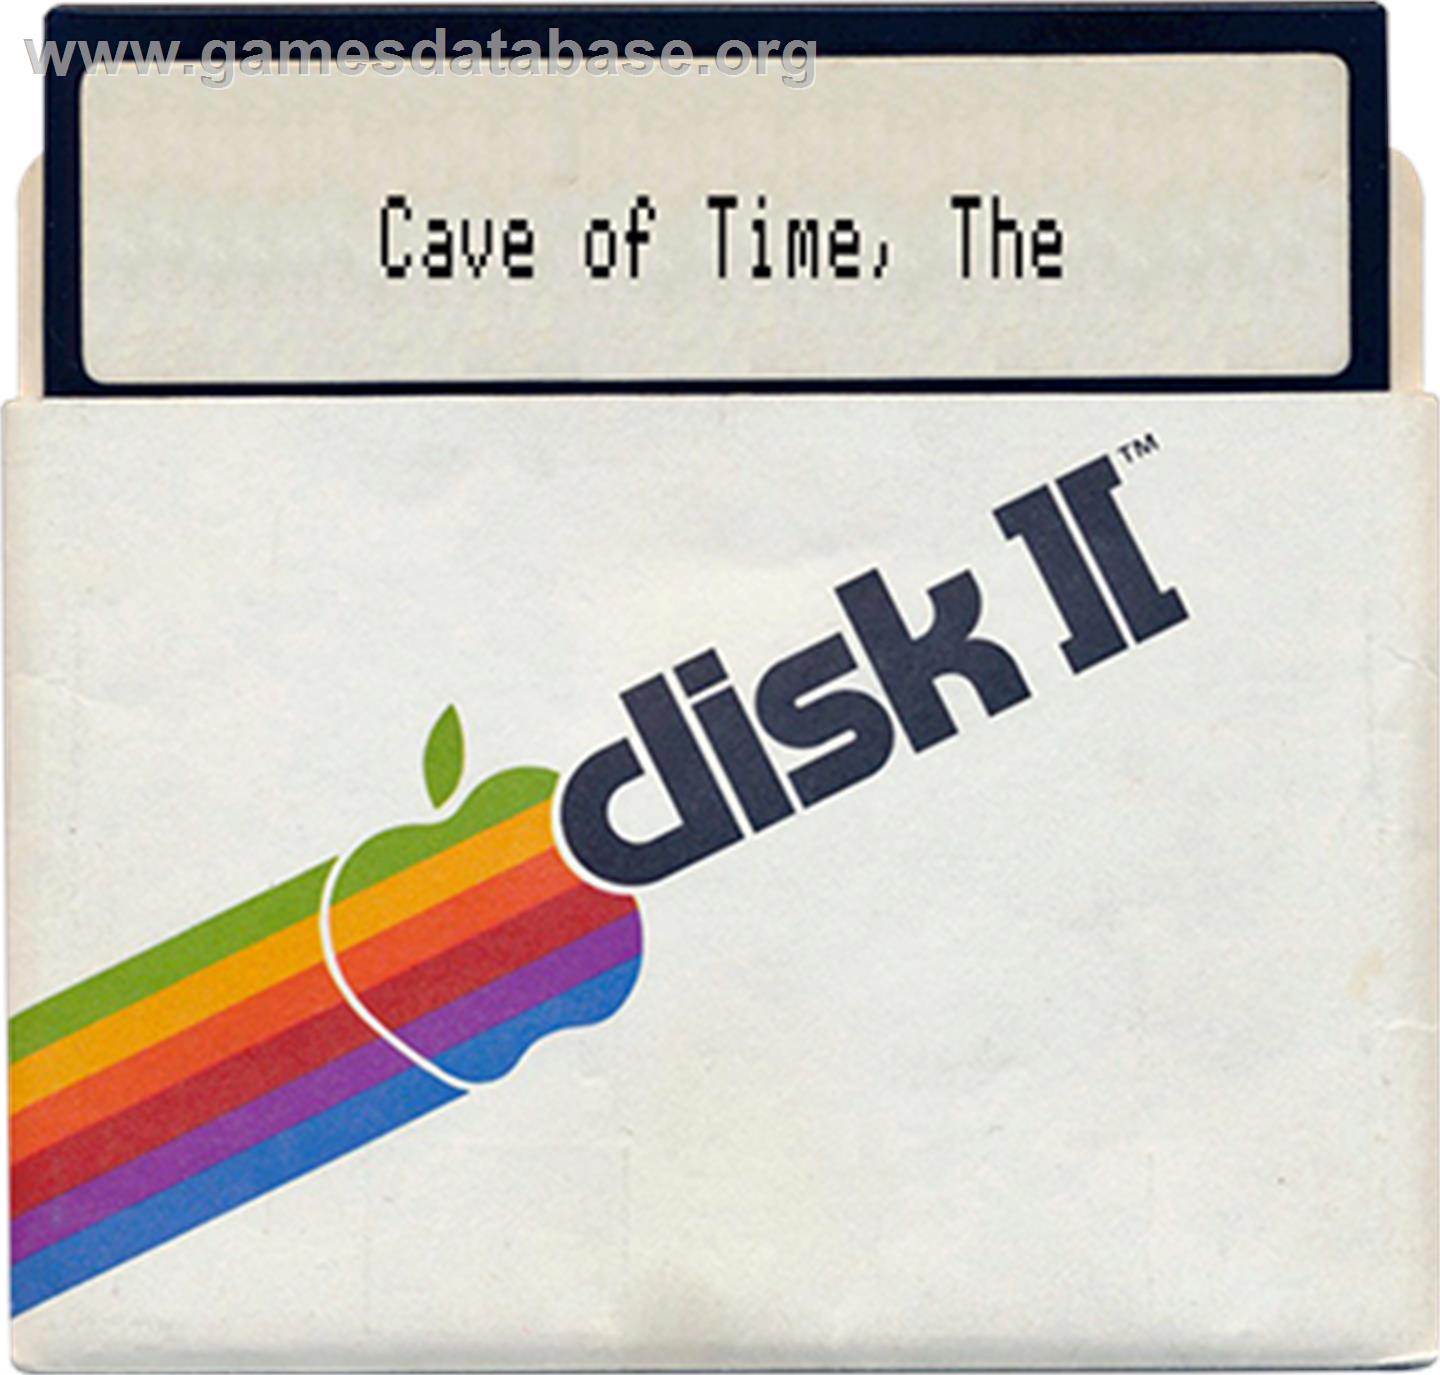 Cave of Time - Apple II - Artwork - Disc